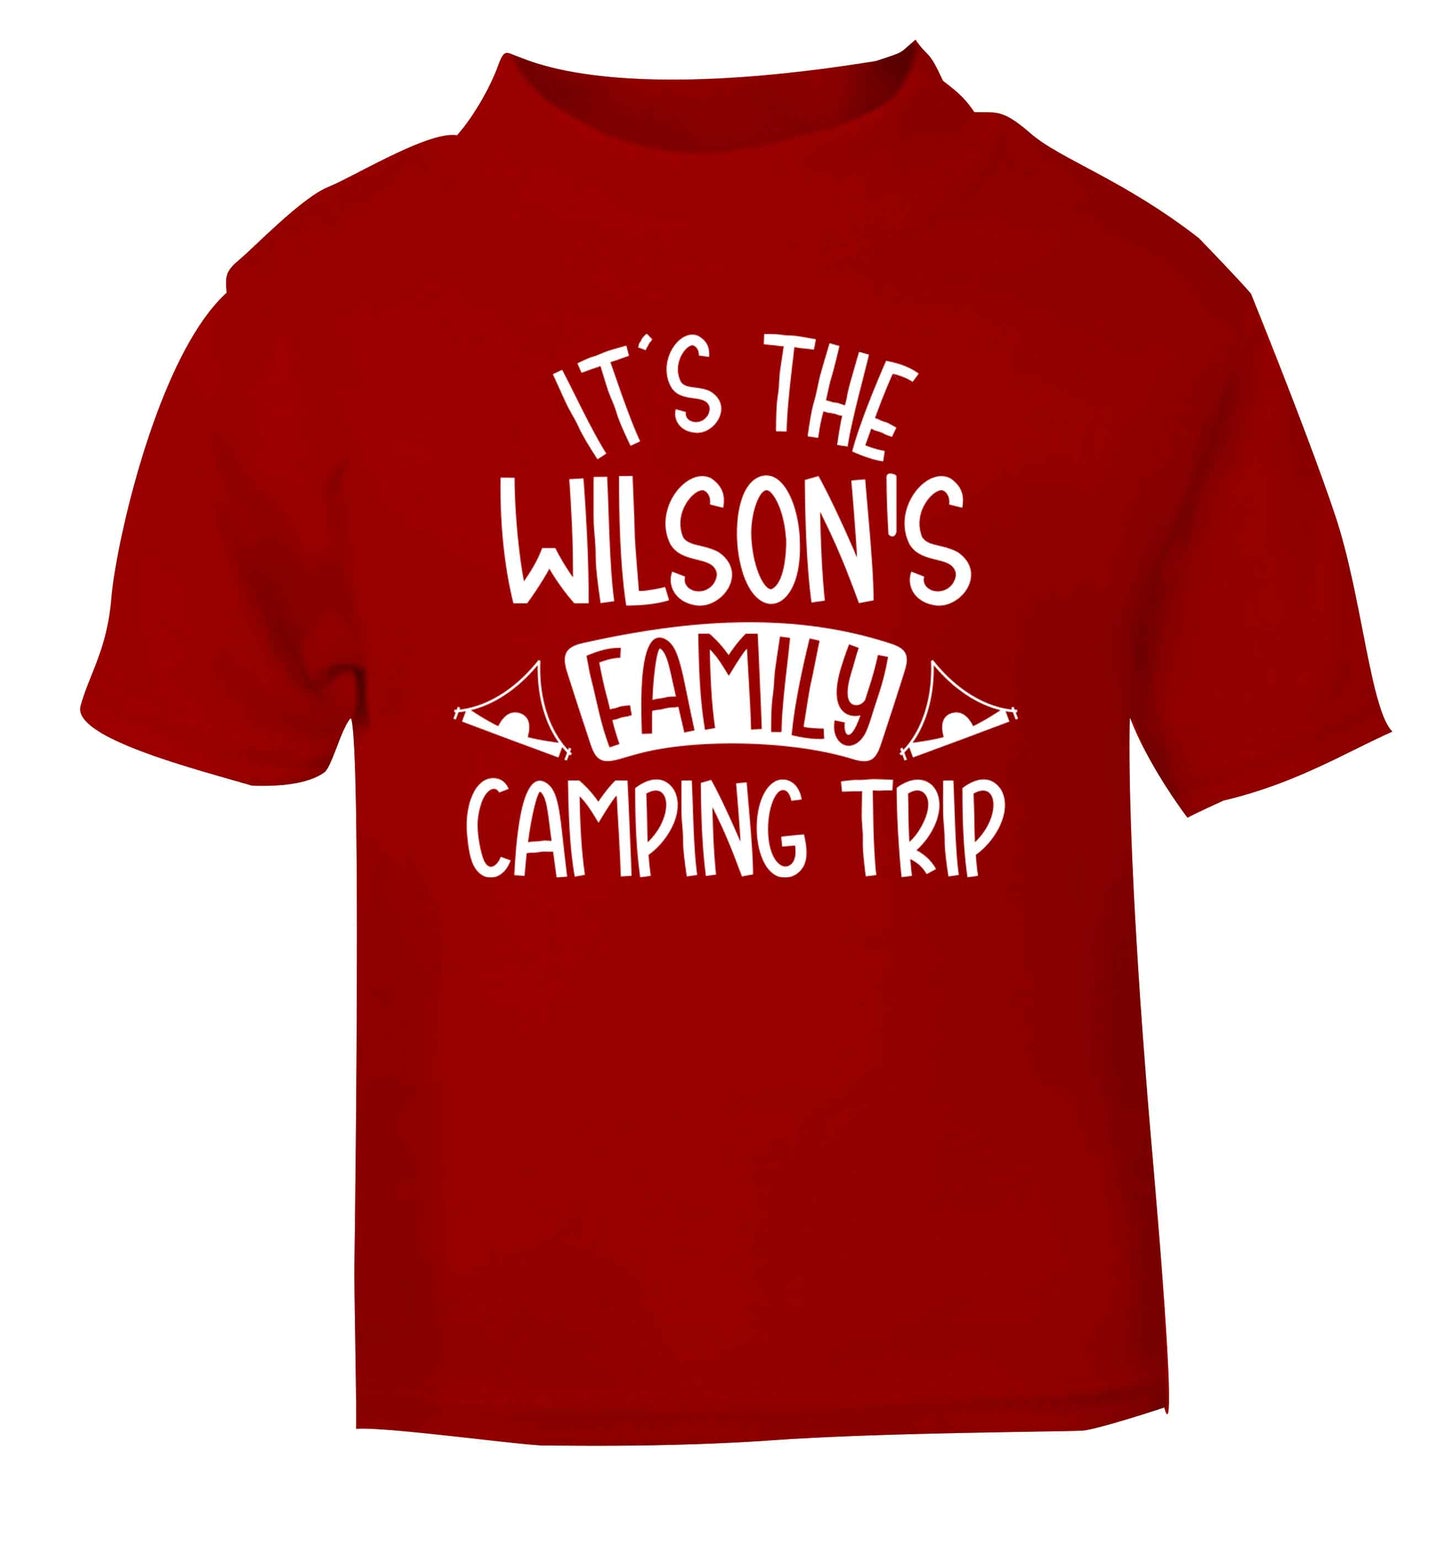 It's the Wilson's family camping trip personalised red Baby Toddler Tshirt 2 Years